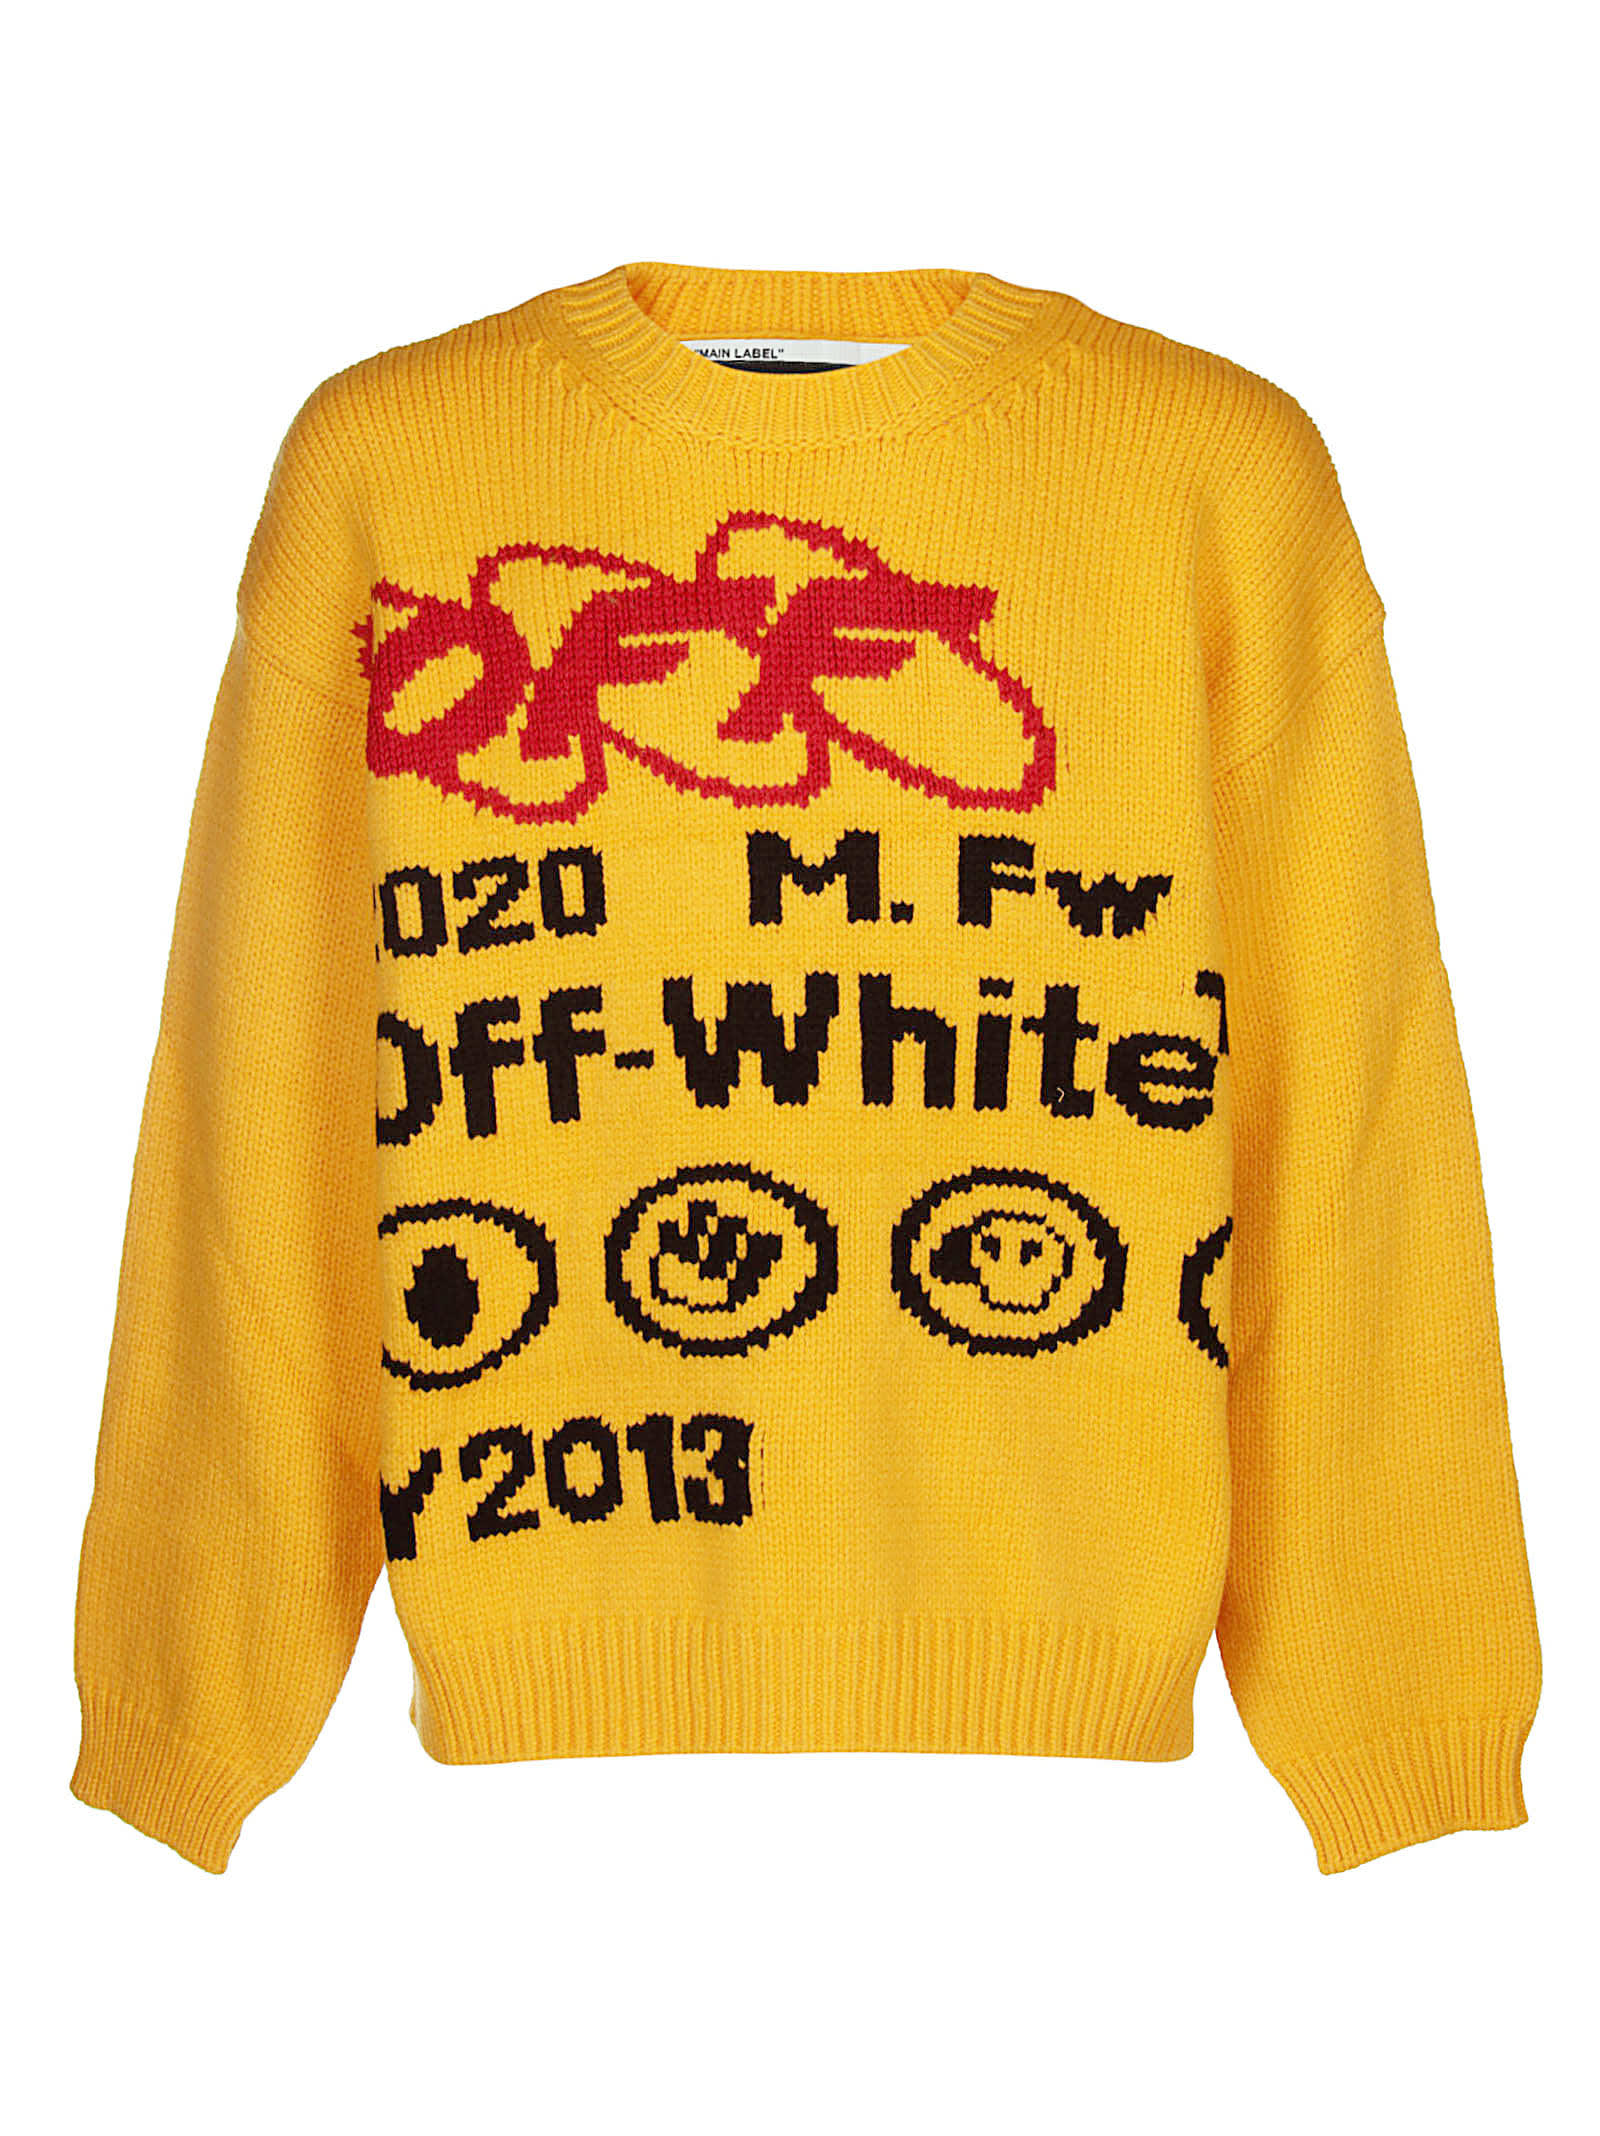 Off White Off White Industrial Y013 Jumper Yellow Black